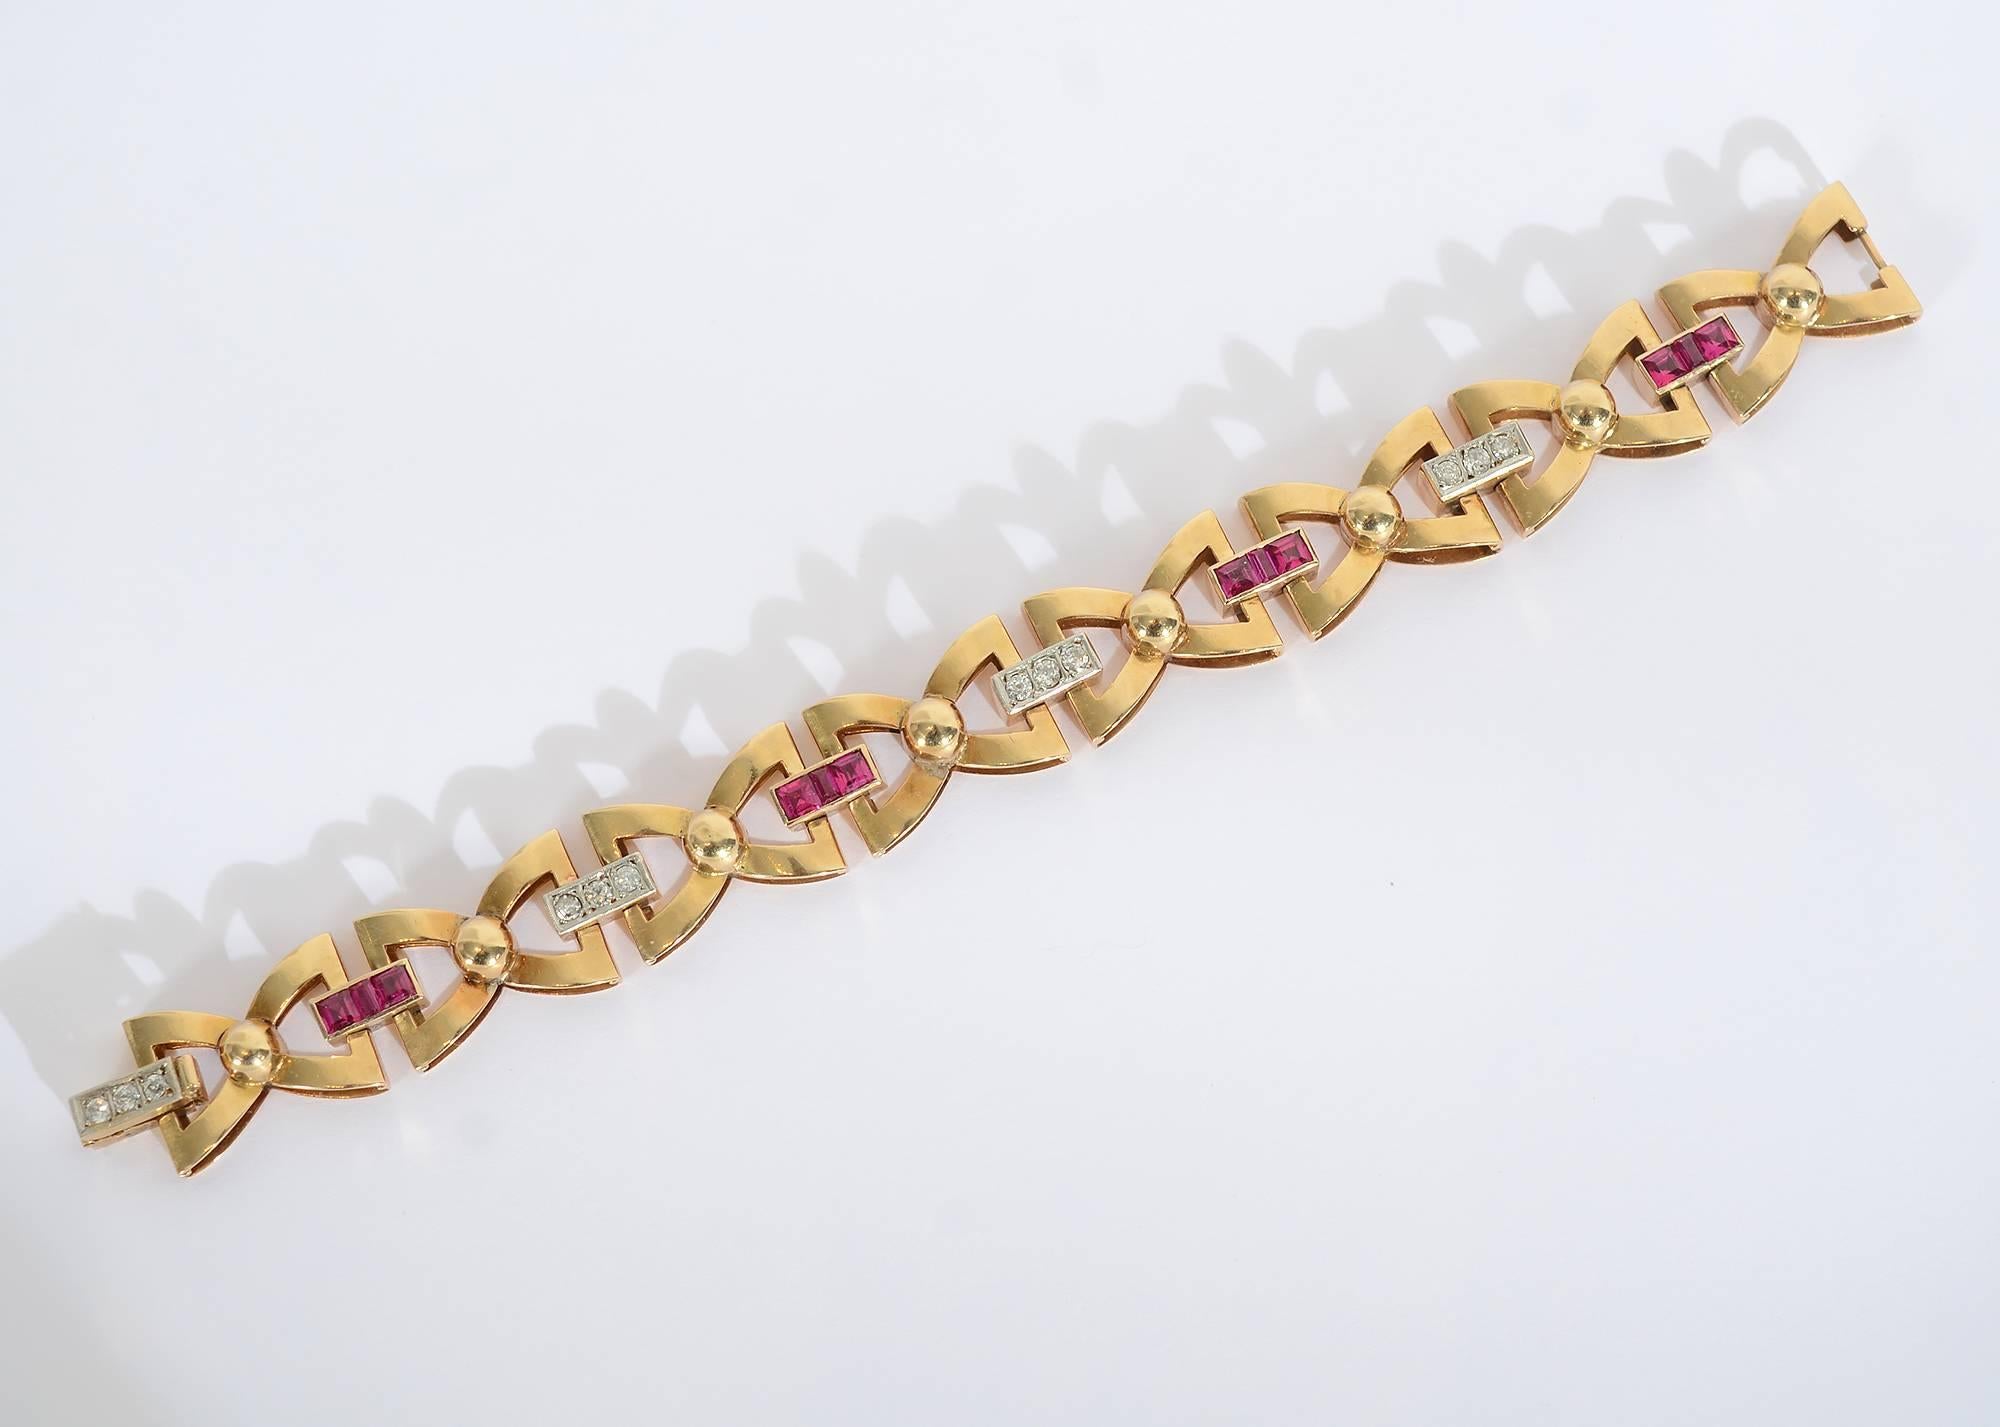 Graceful and unusual Retro bracelet enhanced with diamonds and rubies. Triangular links are joined to give the appearance of bows. Length is 7 5/16"; height is 5/8".